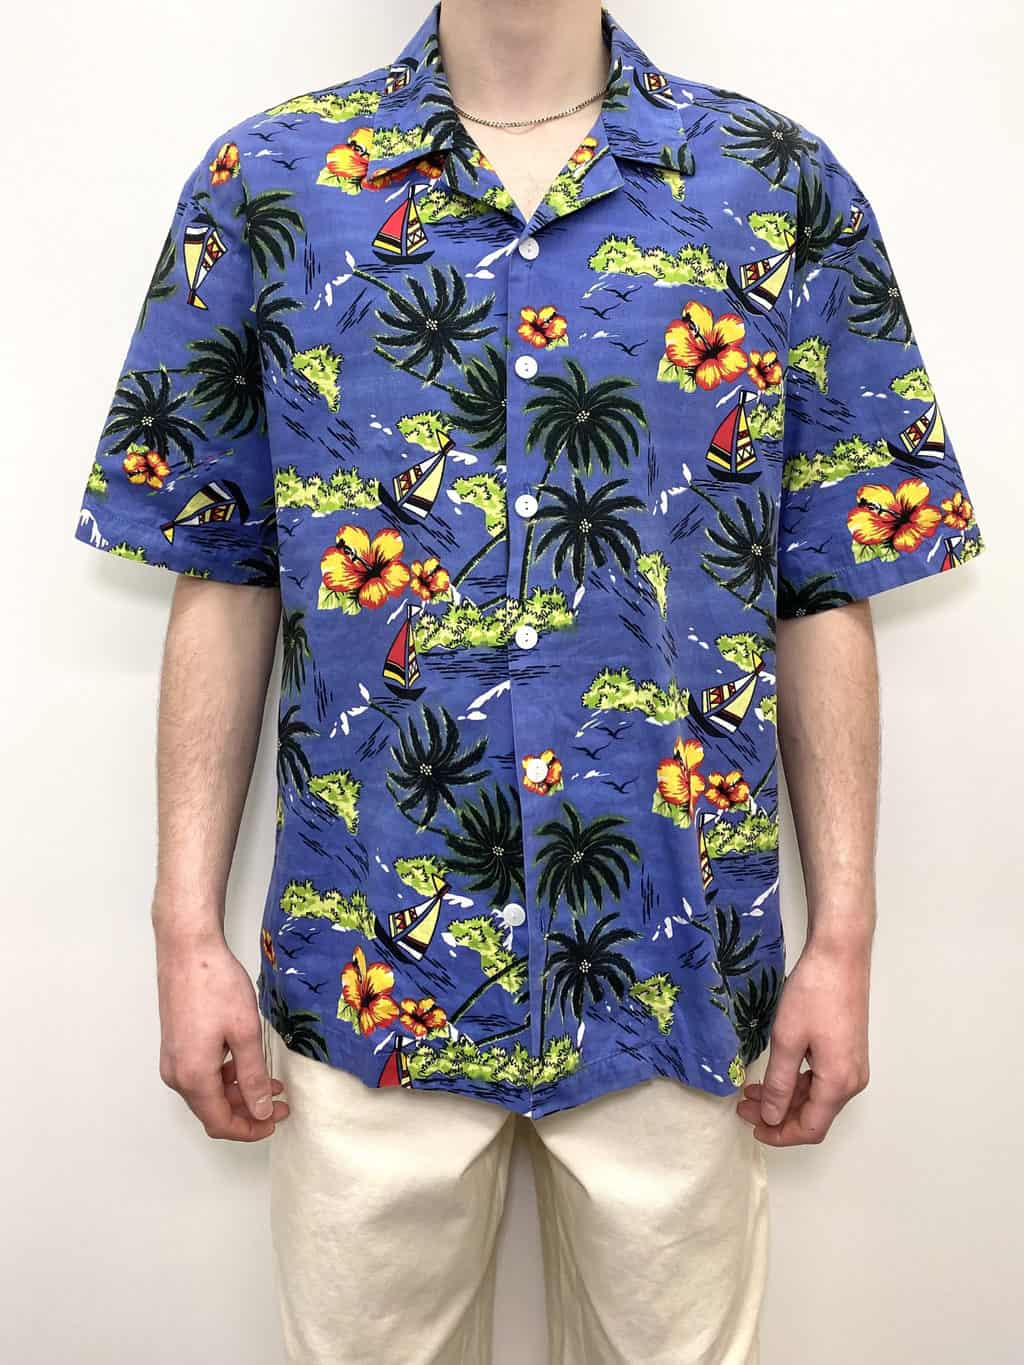 Mens bright vintage Hawaiian shirt with boats and palm trees floral green  blue yellow beach sea scene - Large / XL